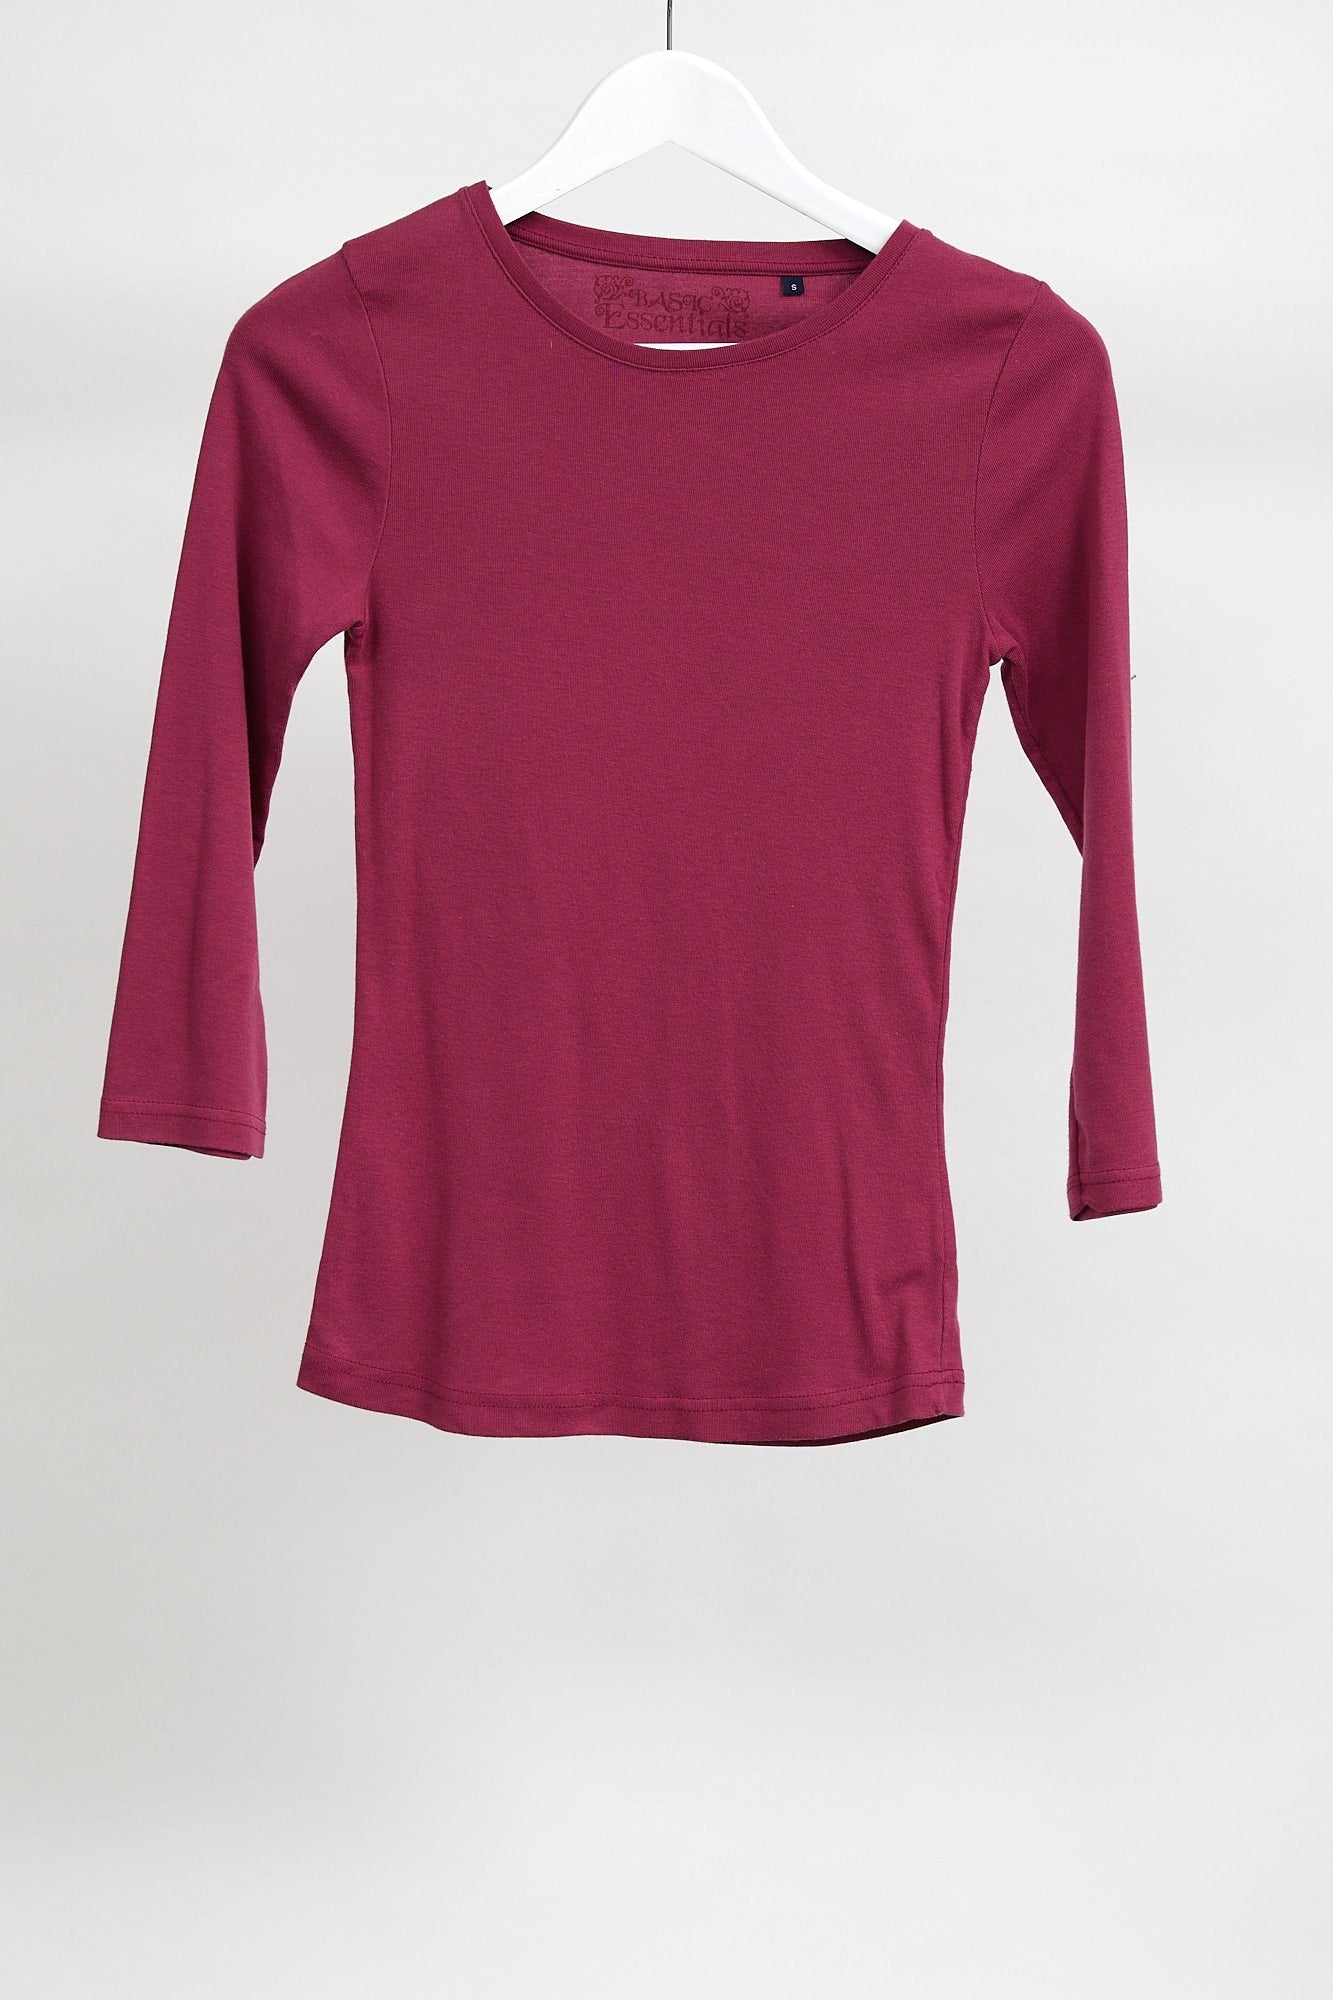 Womens Pink Long Sleeve T-Shirt: Size Small